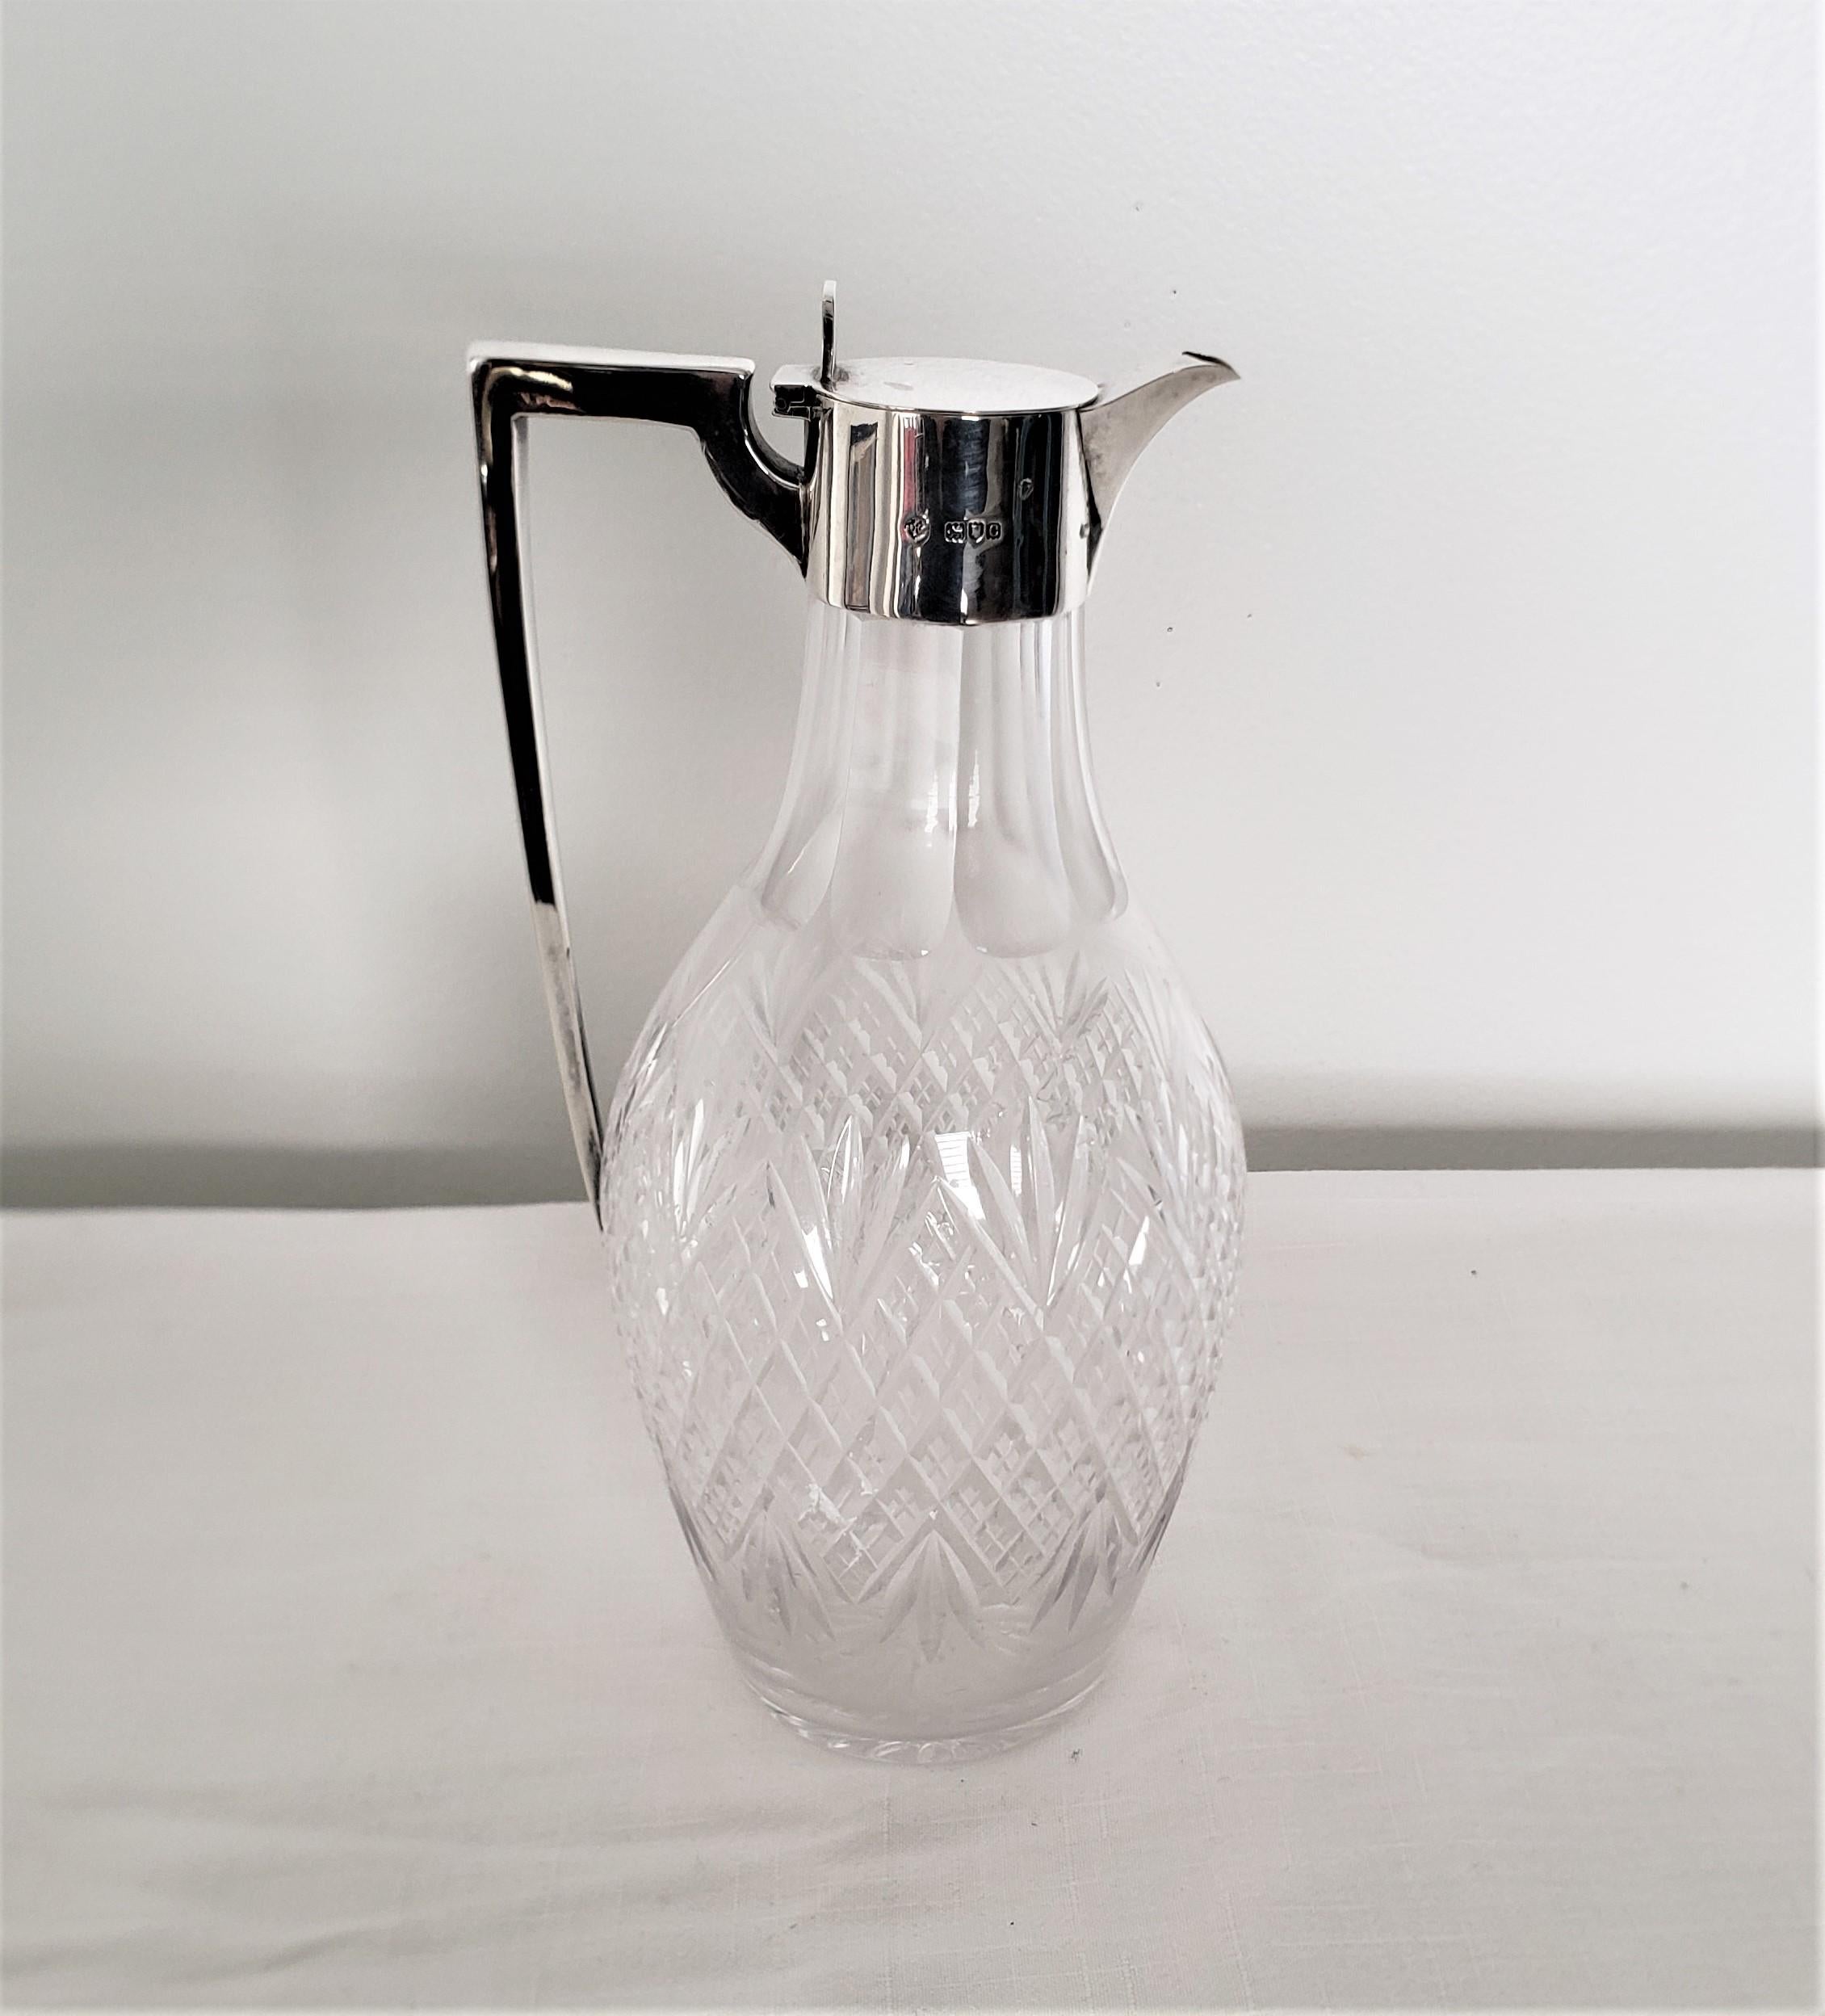 Antique English Sterling Silver & Cut Glass Claret Jug or Pitcher In Good Condition For Sale In Hamilton, Ontario